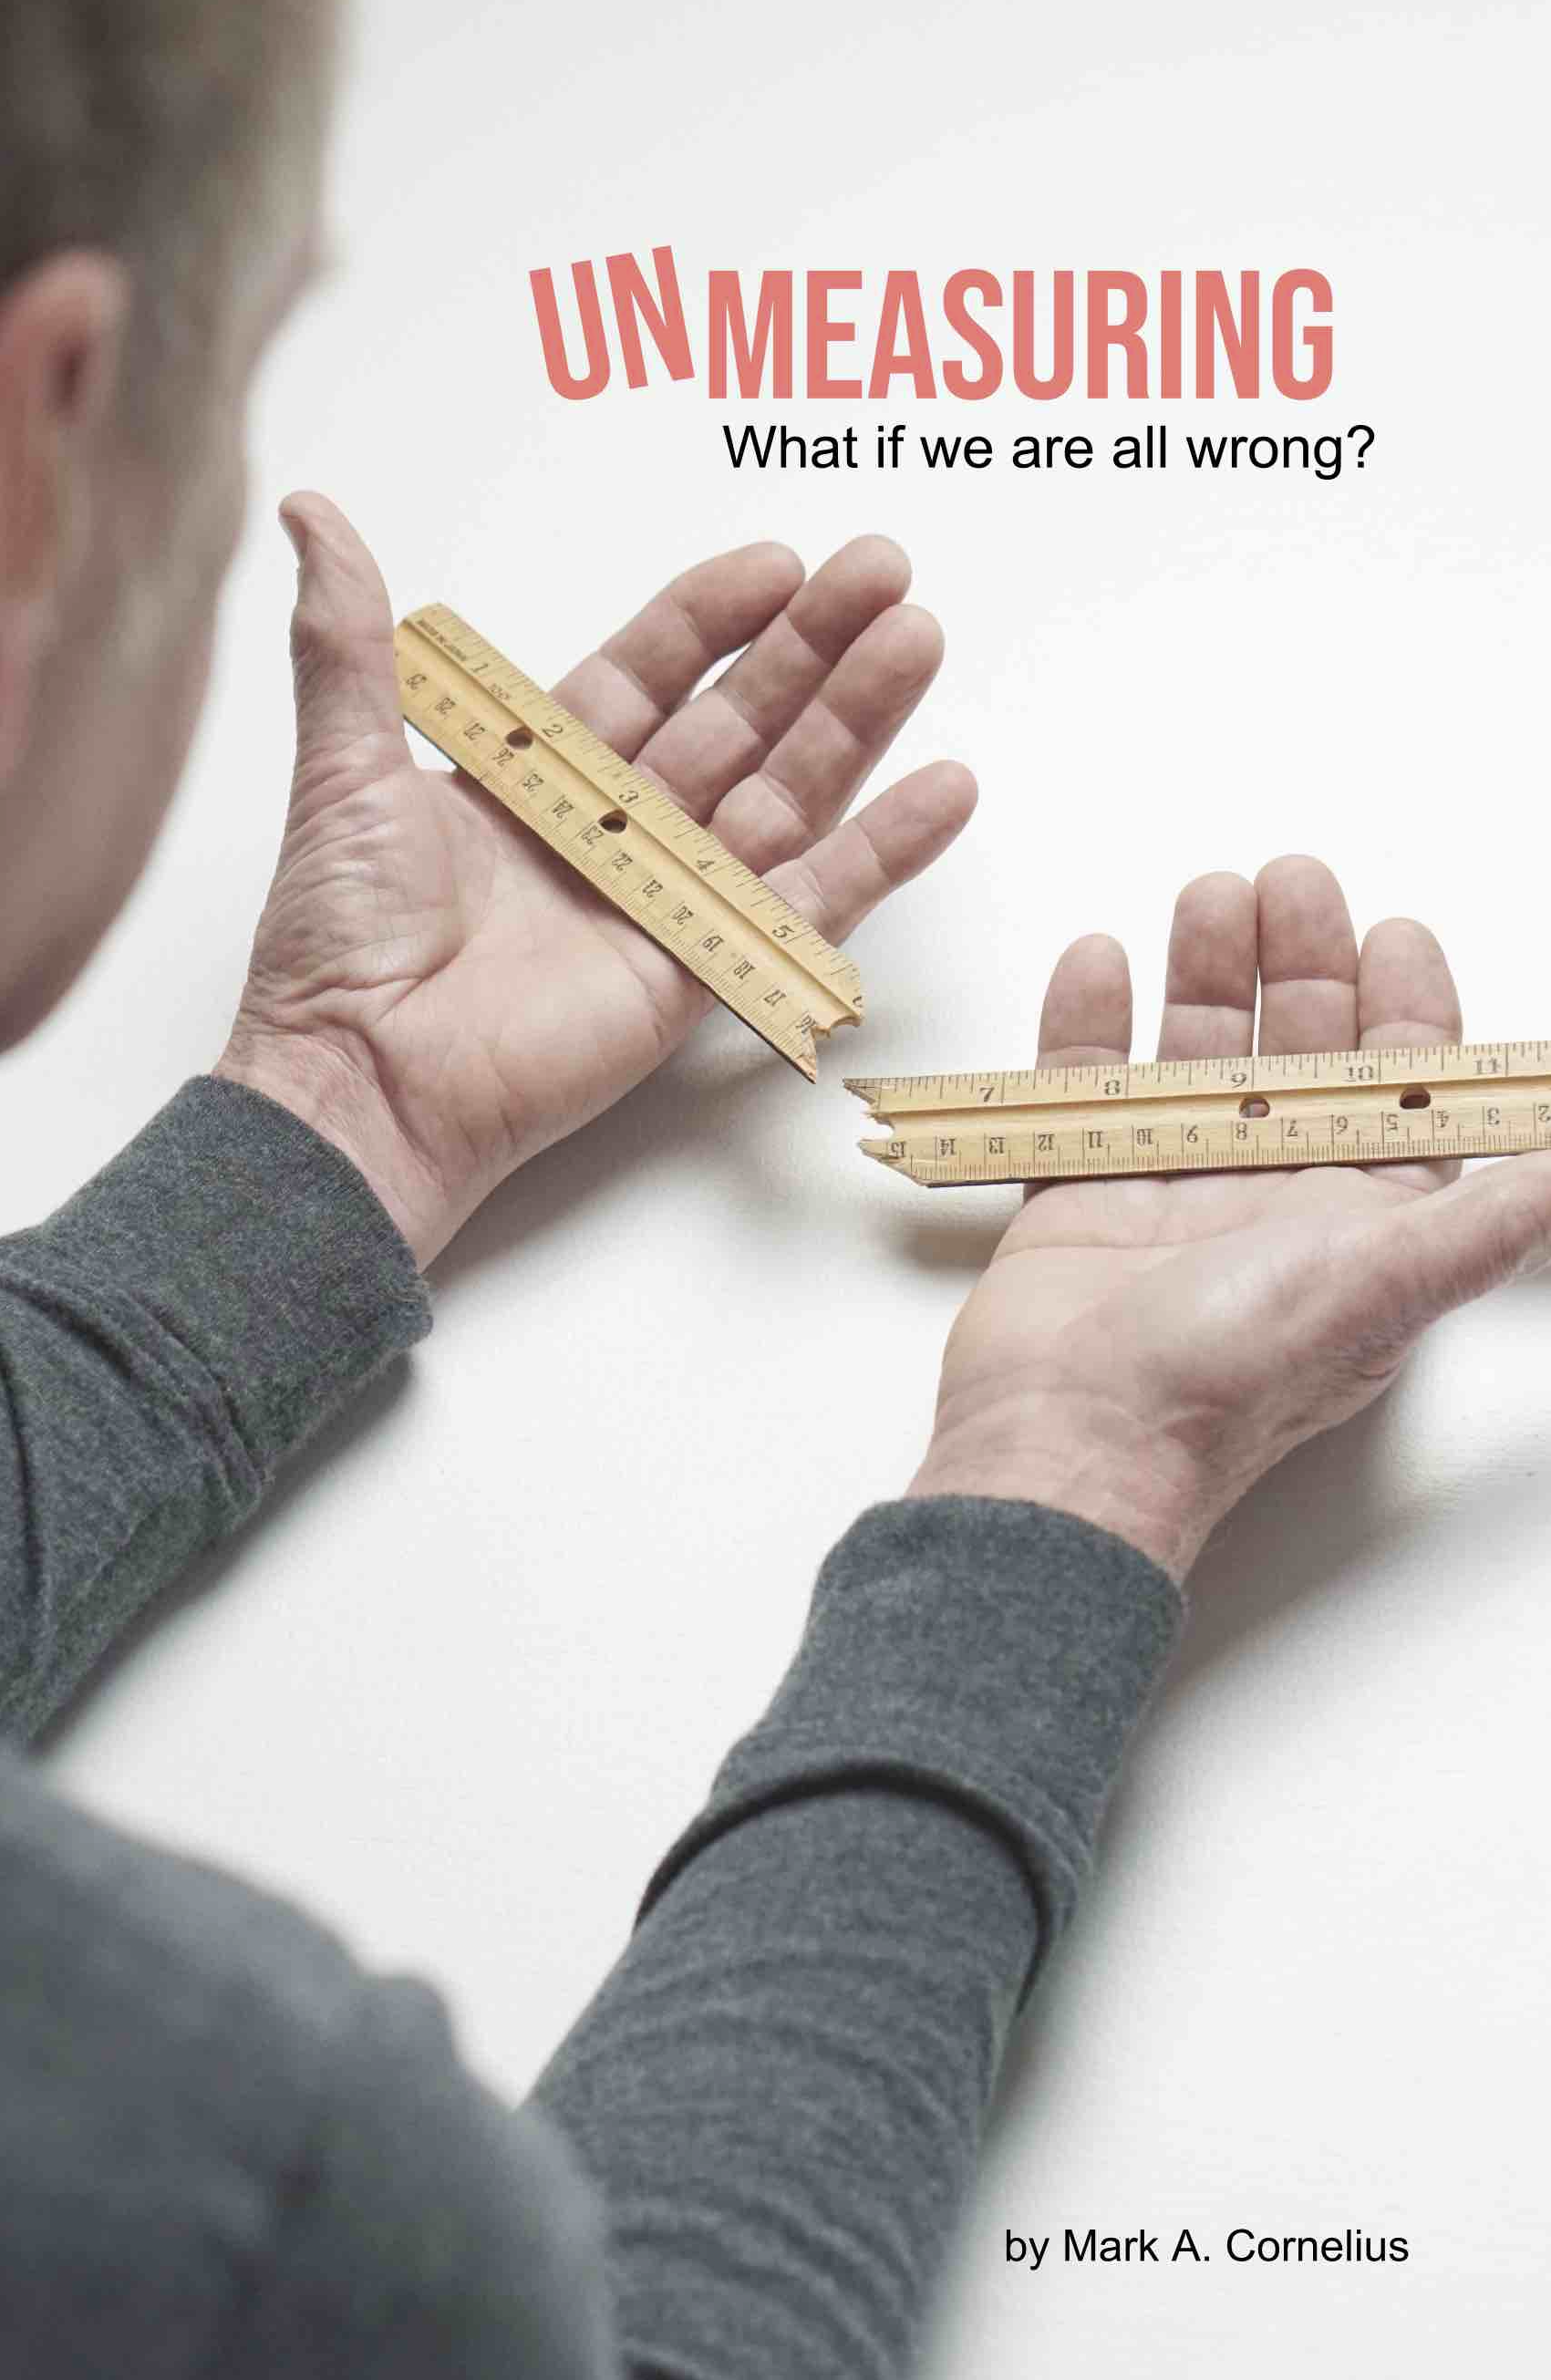 UnMeasuring – What if we are all wrong?